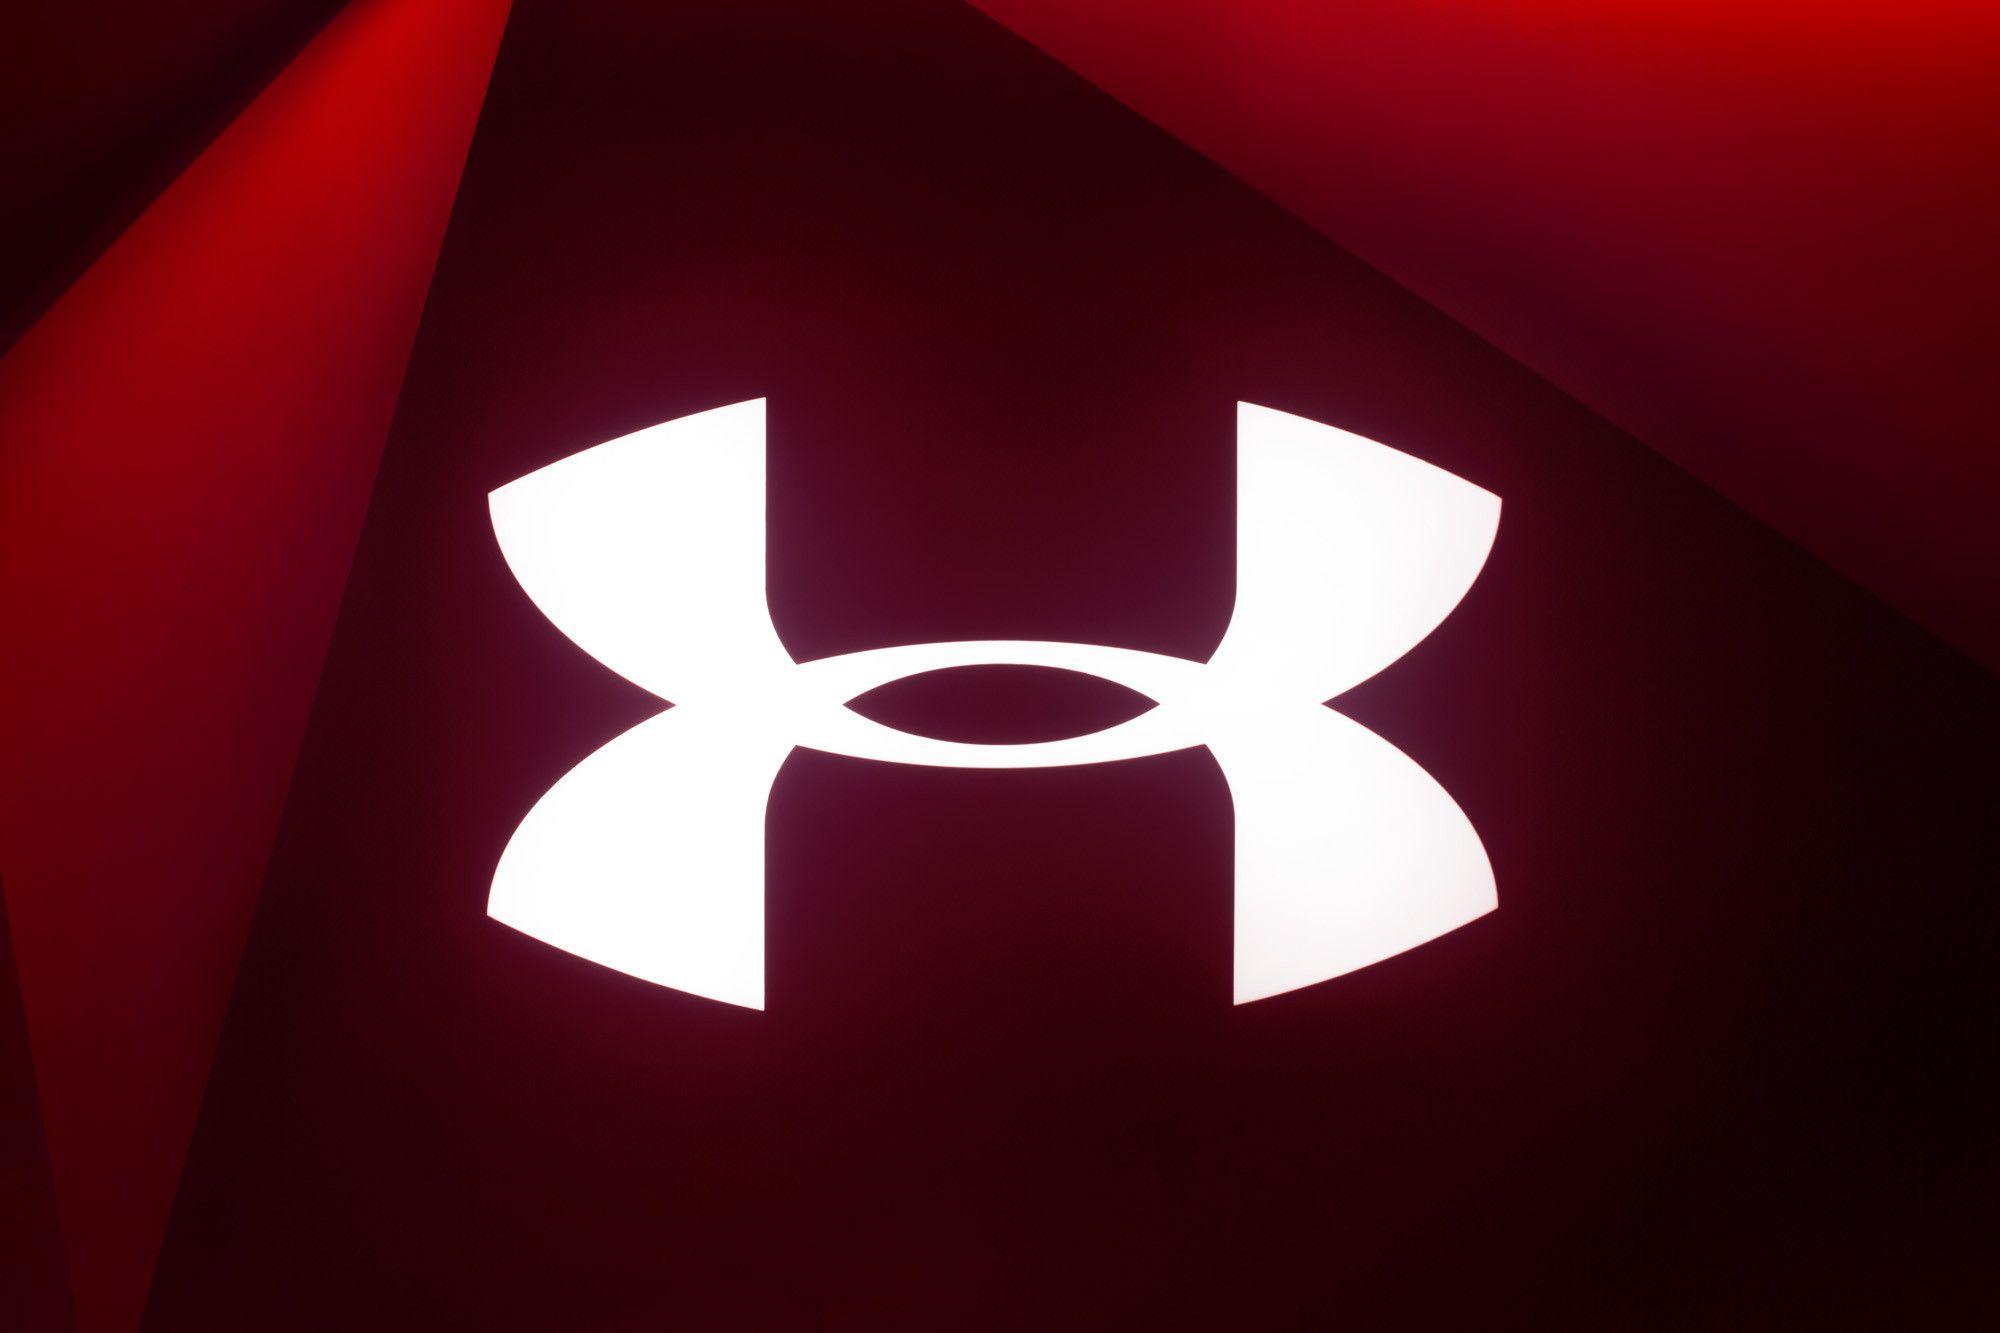 Galleries of Under Armour Logo - Gallery of Under Armour / Marc Thorpe Design - 13